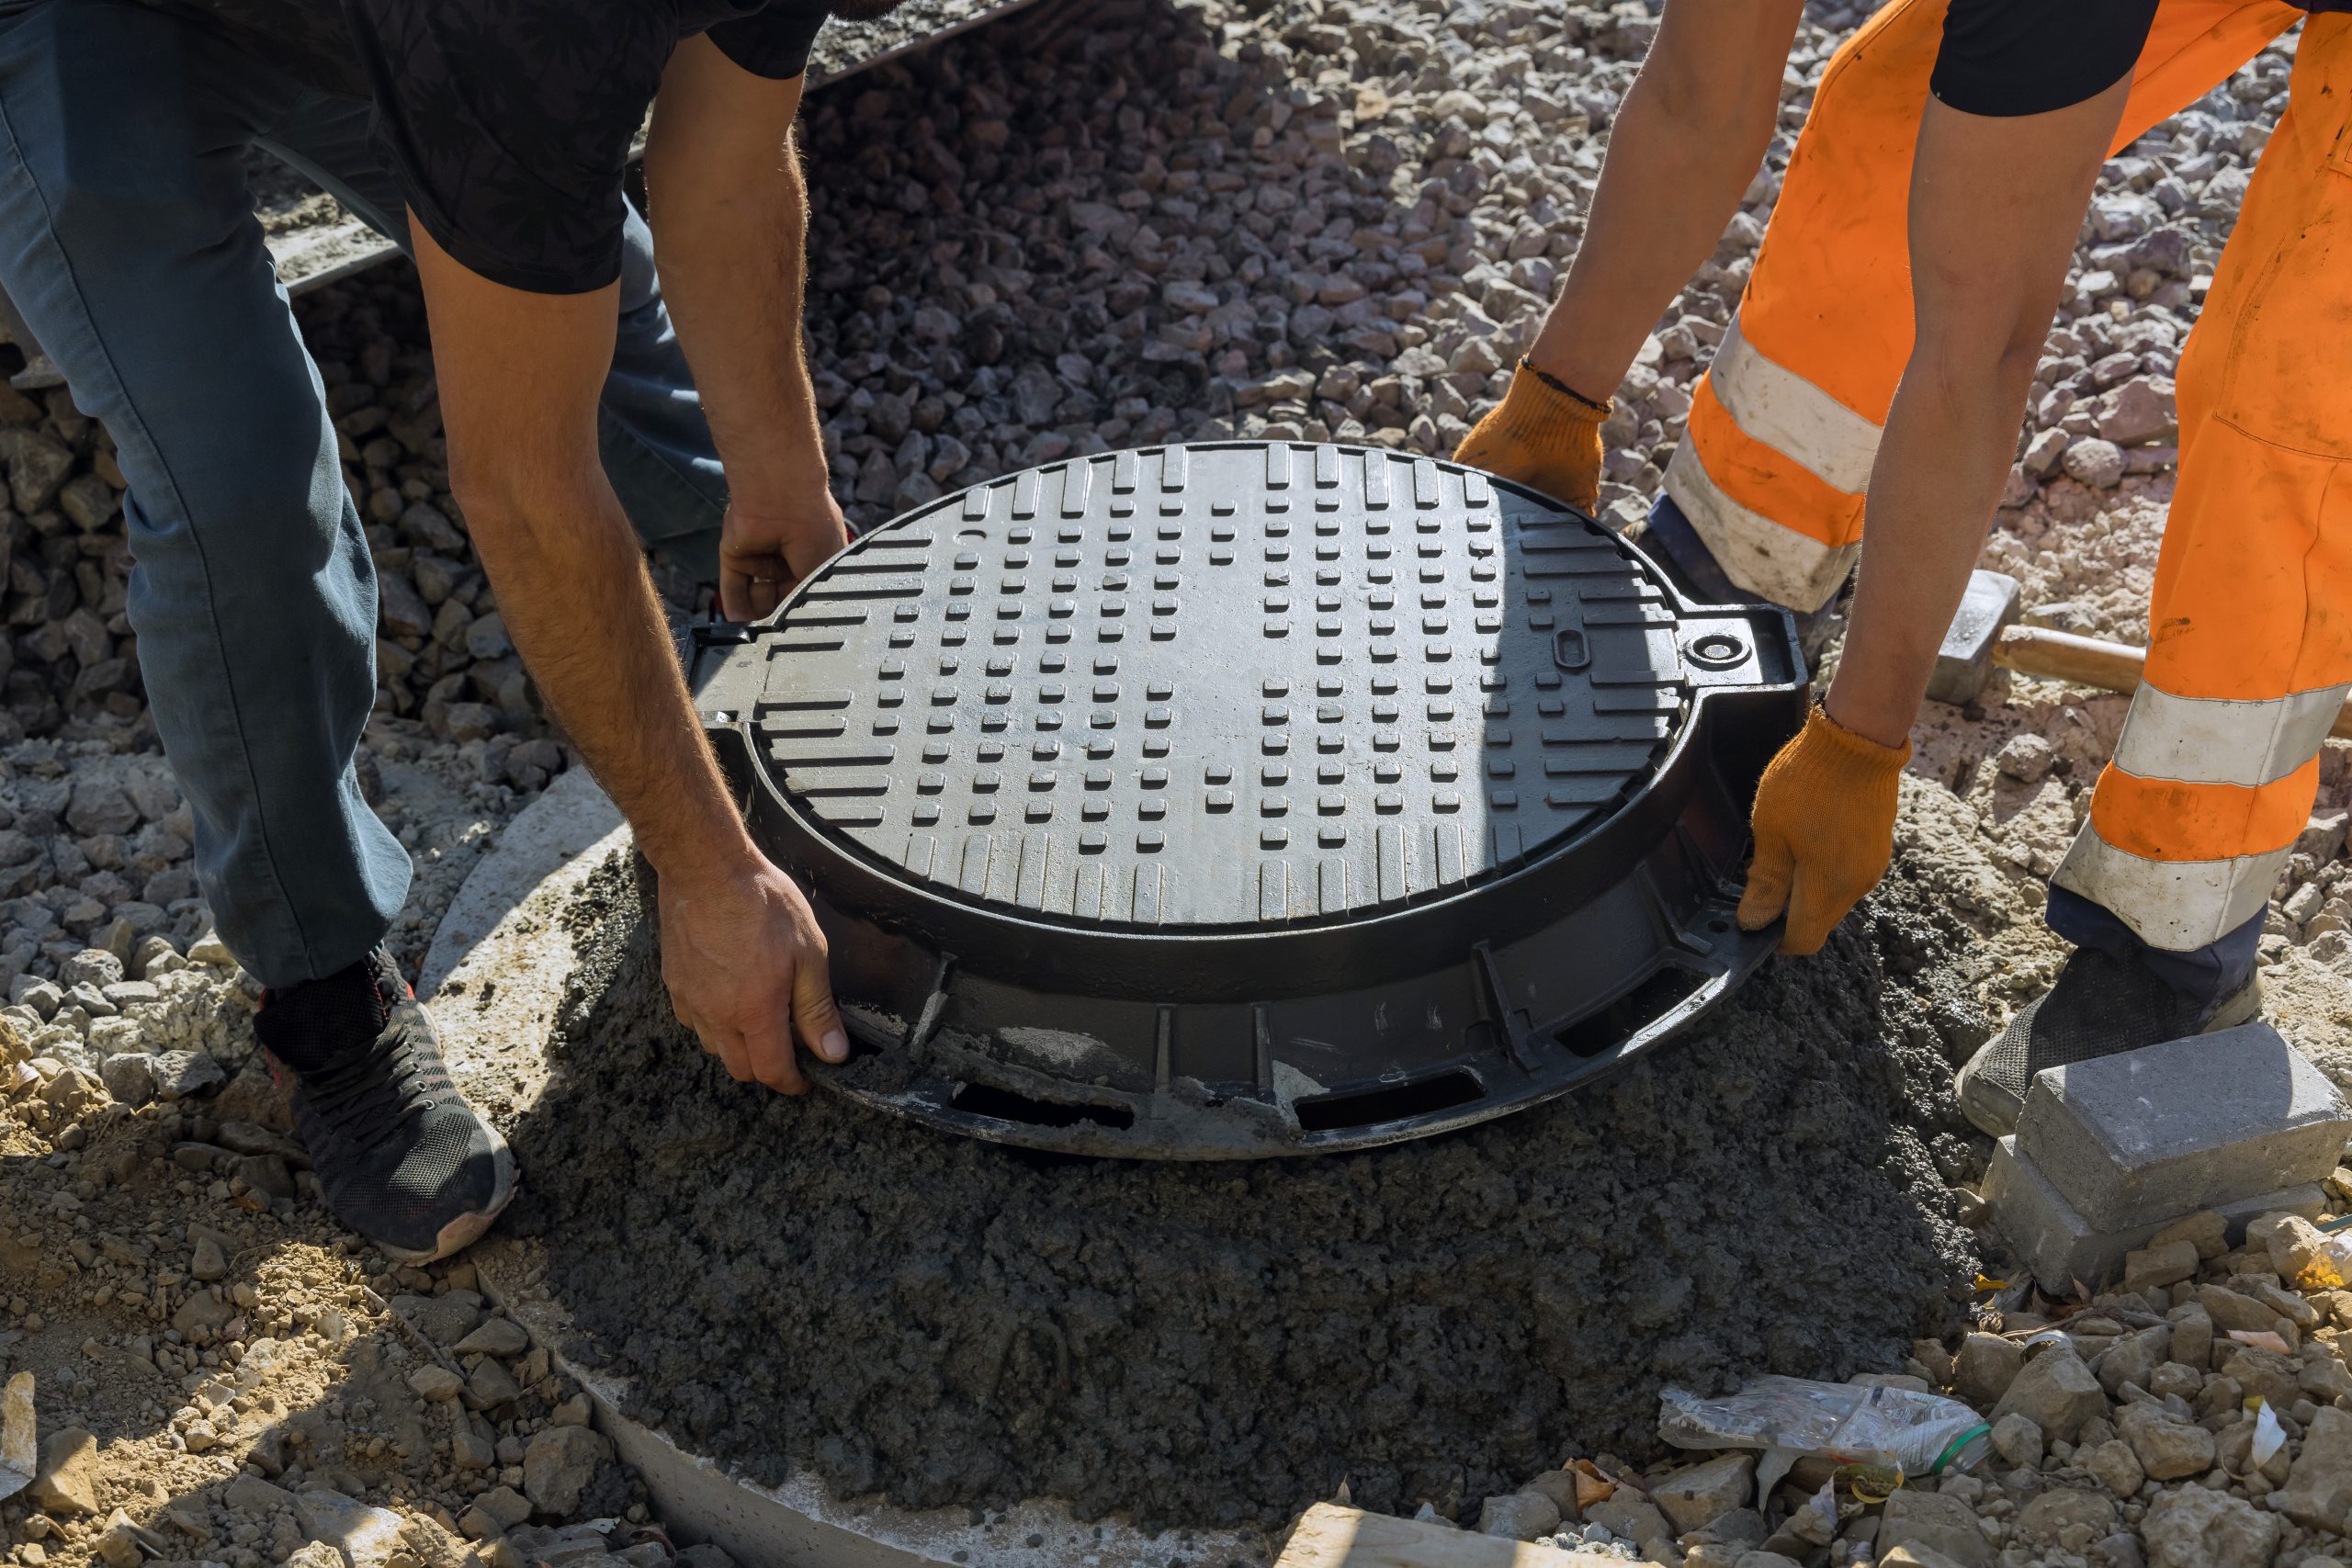 A worker installs a sewer manhole on a septic tank made of concrete rings on Simphome